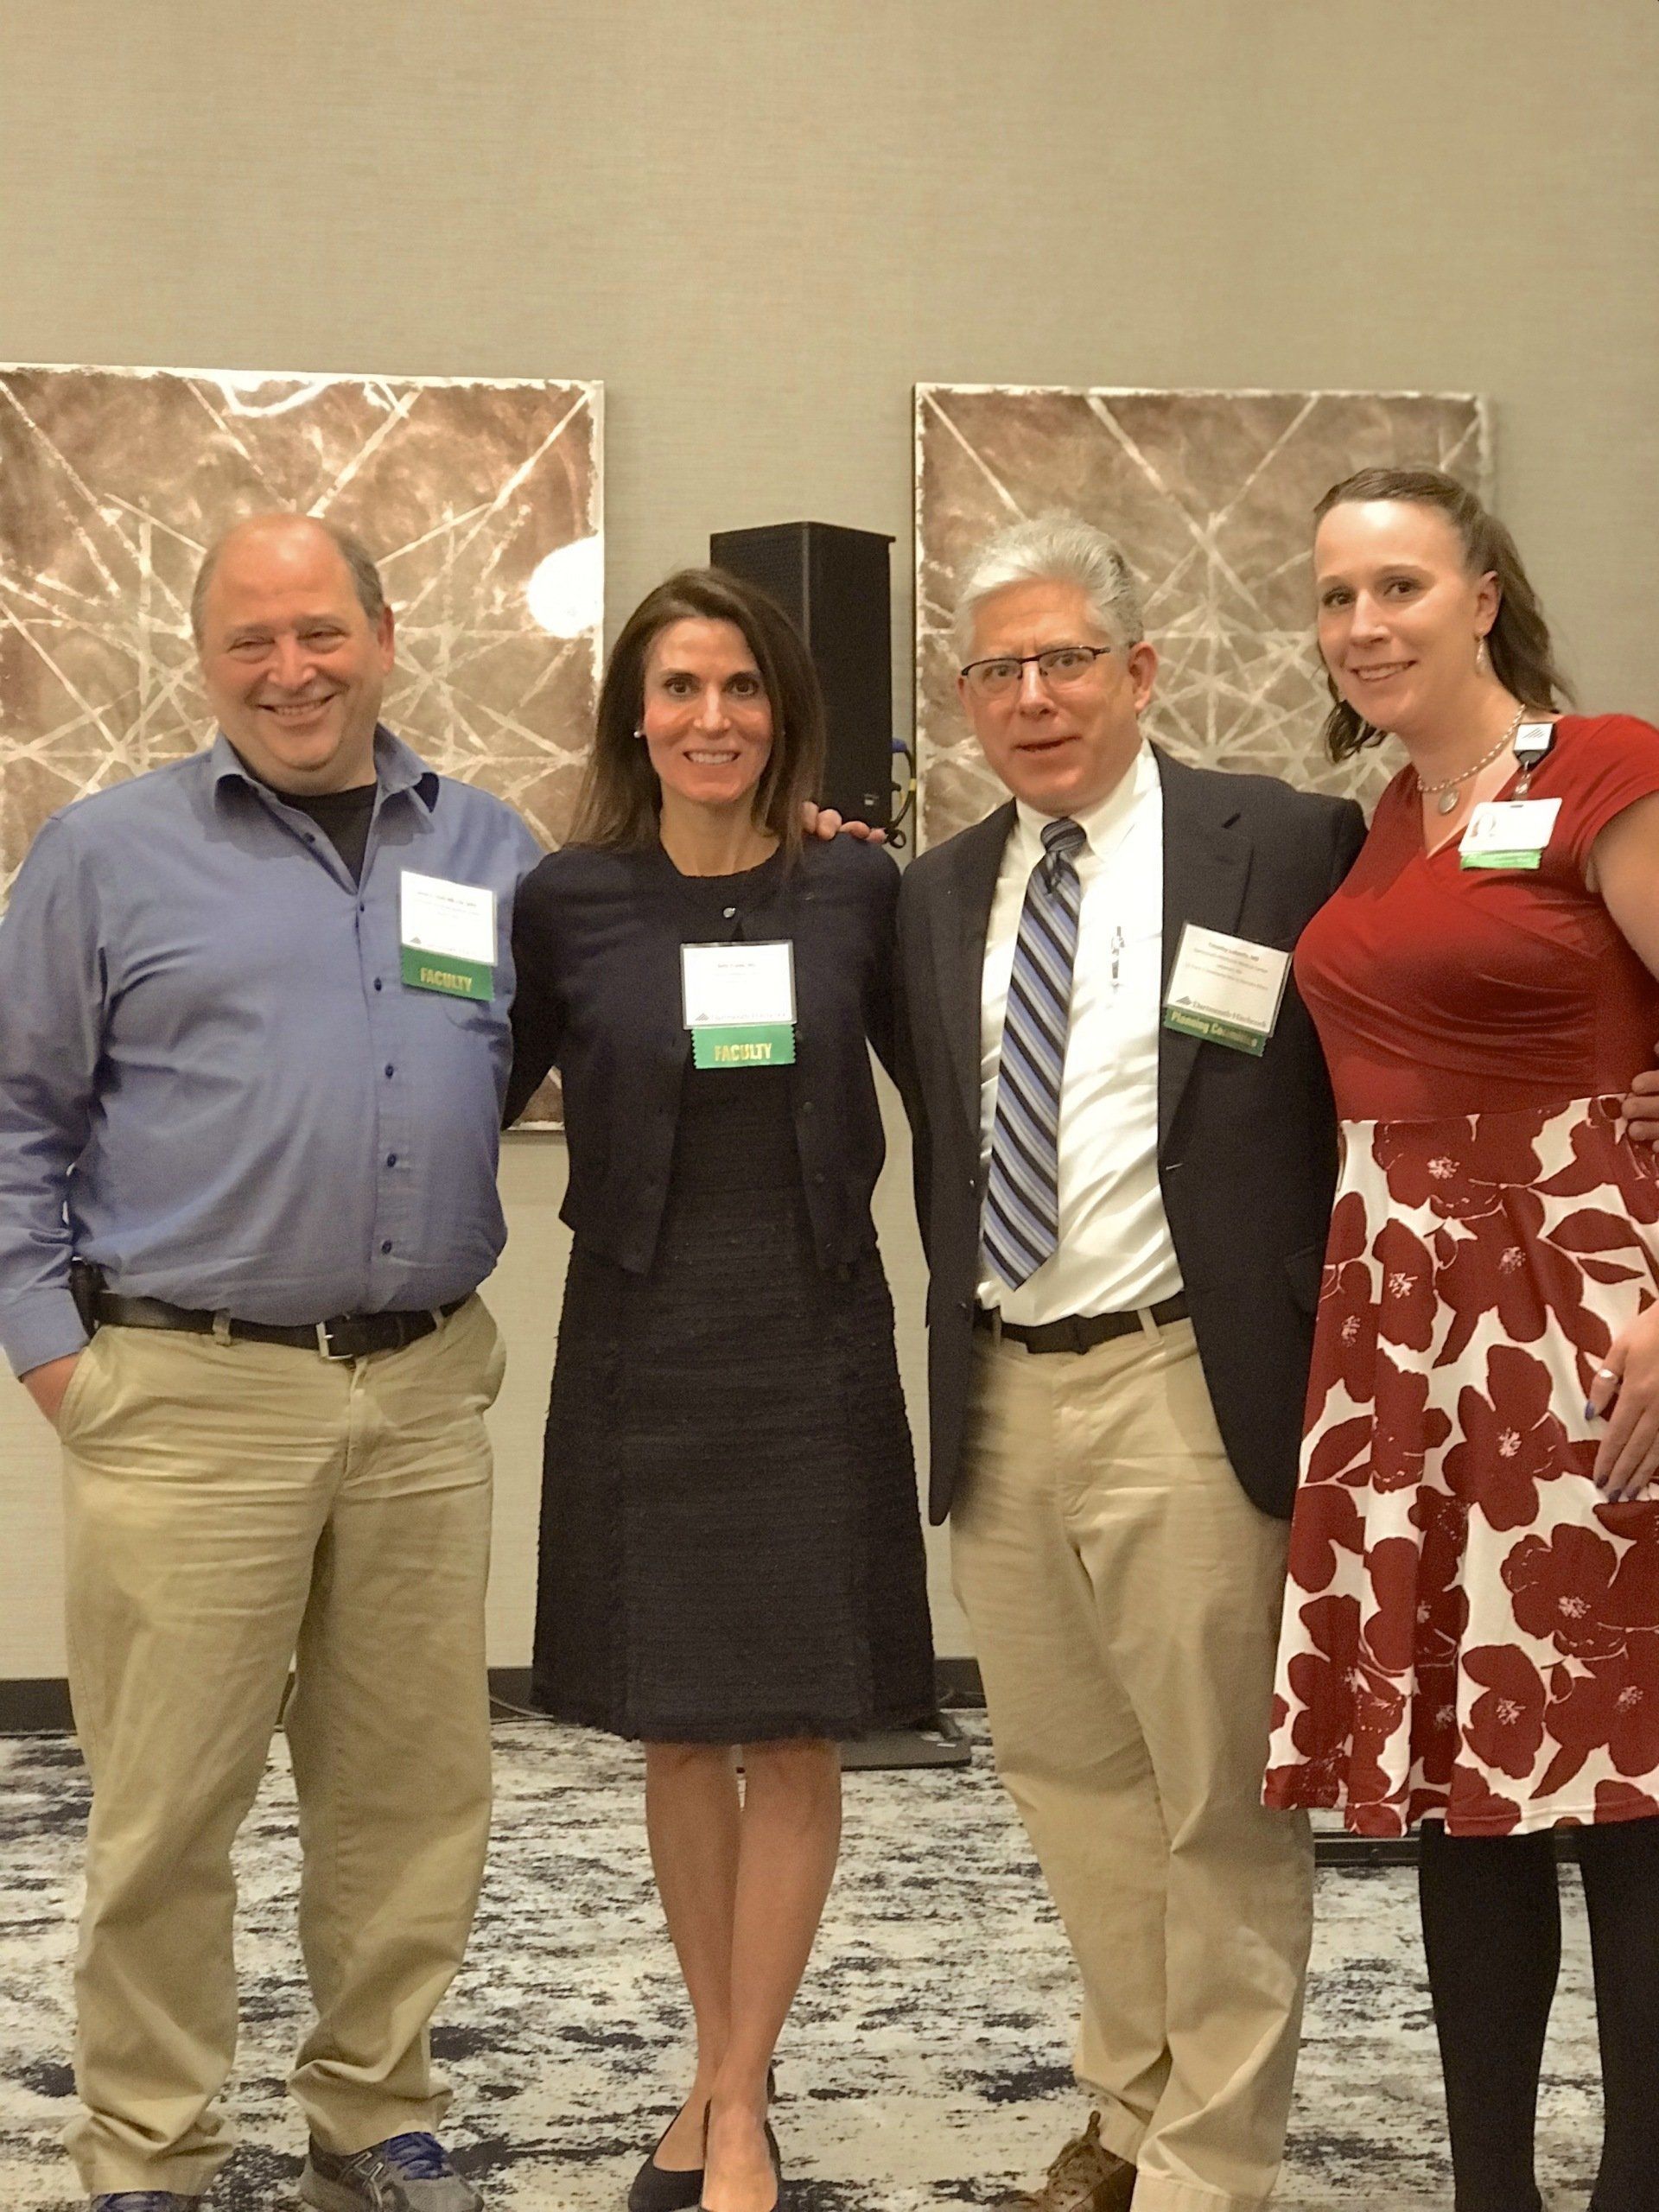 Dr. Beth Frates with colleagues speaking at a conference at Dartmouth Medical Center.